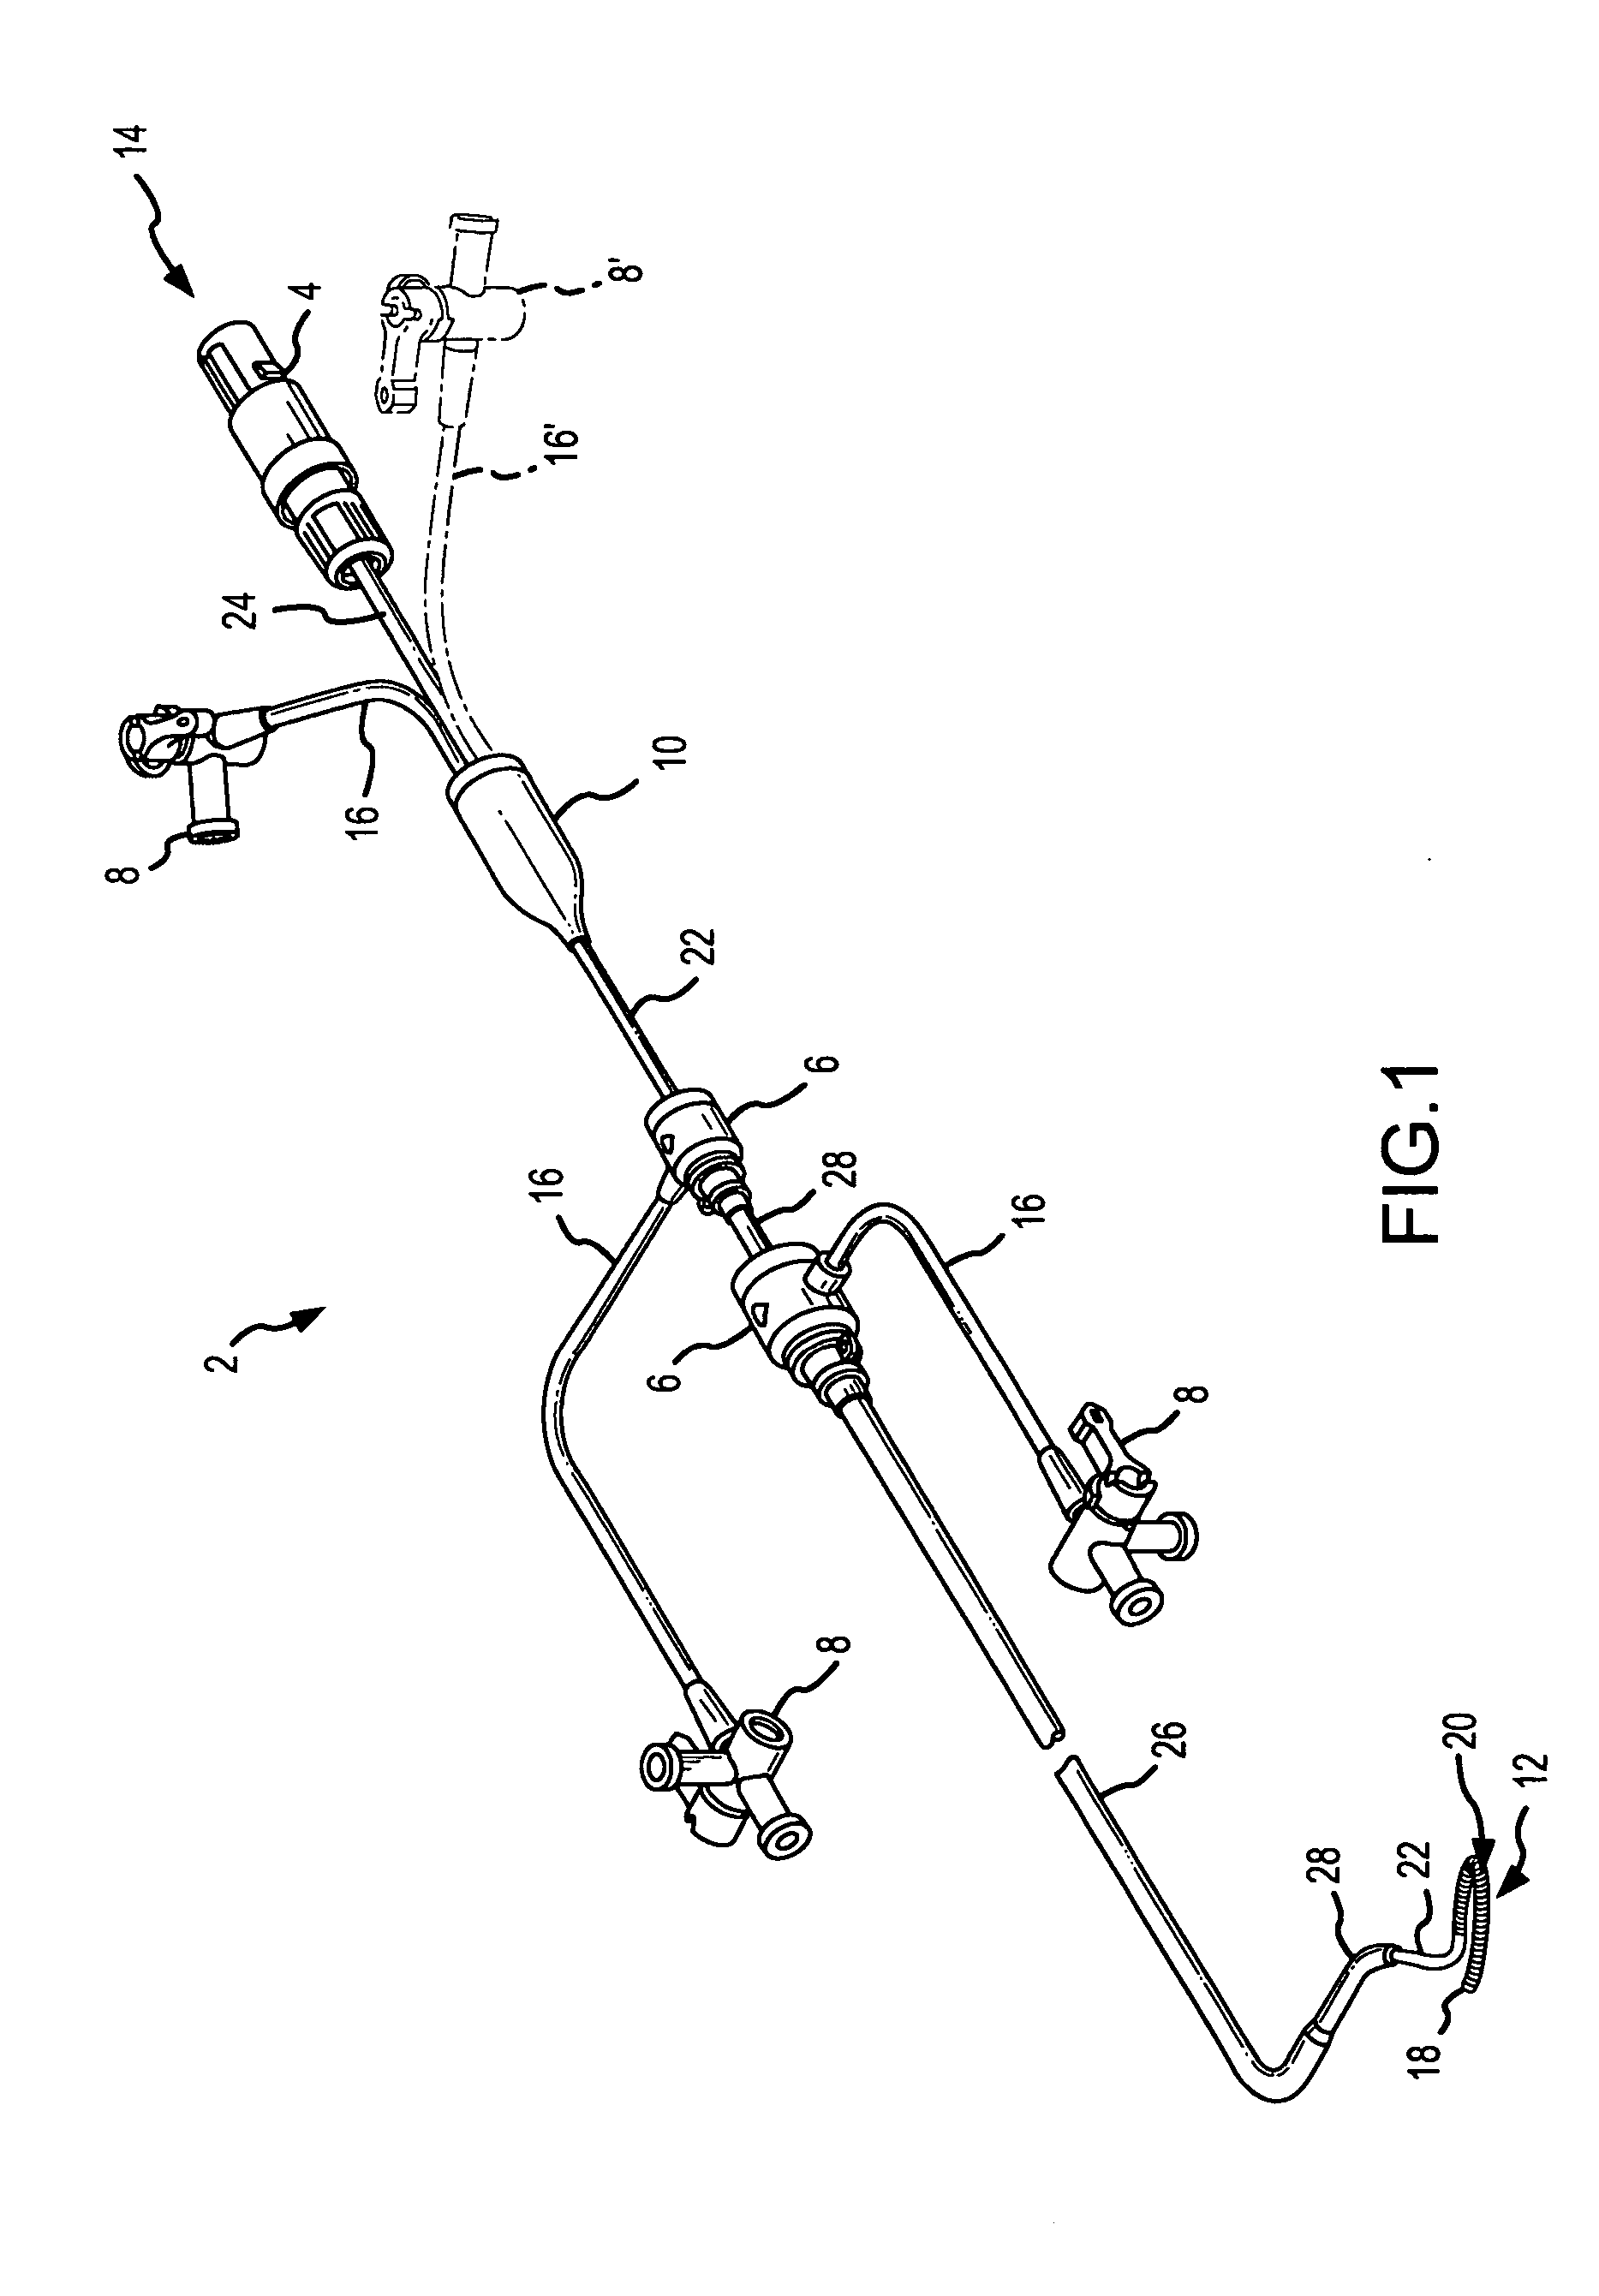 Ablation catheter with contoured openings in insulated electrodes